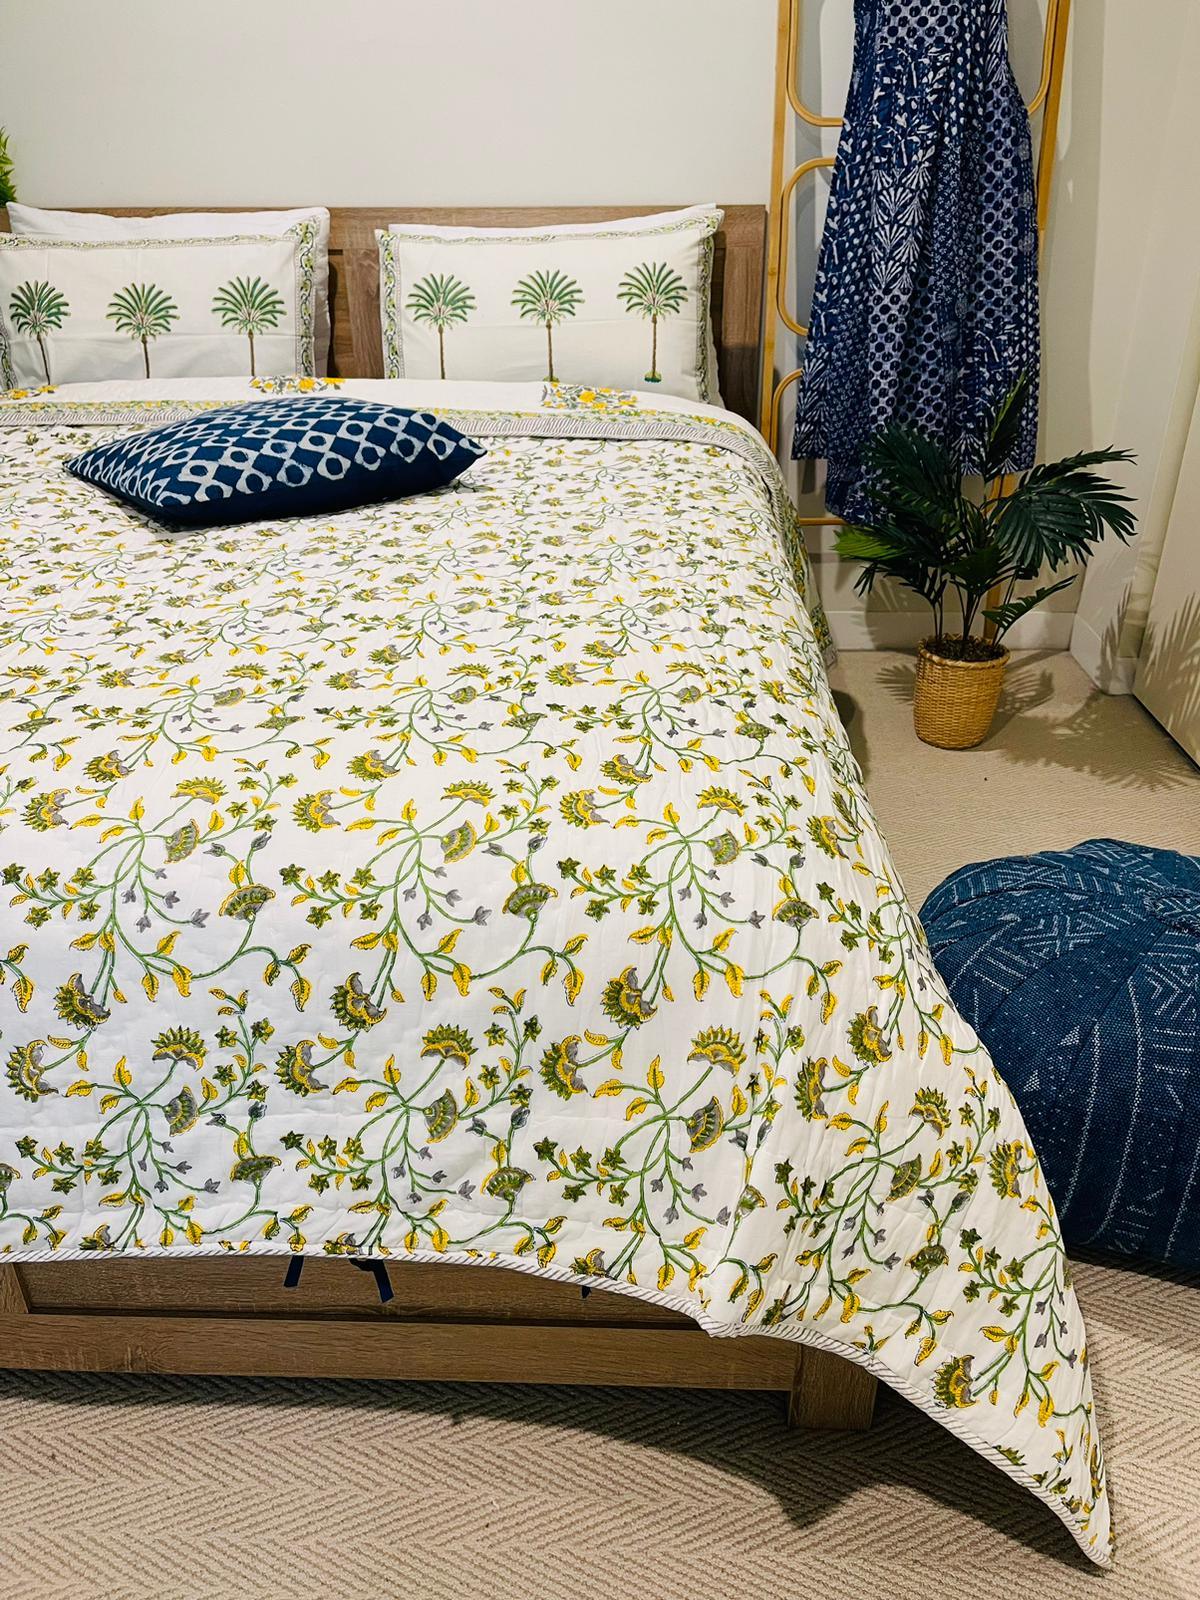 Yellow Floral Cotton Filled Quilt/Bedspread Hand Block Print - Rooii by Tuvisha